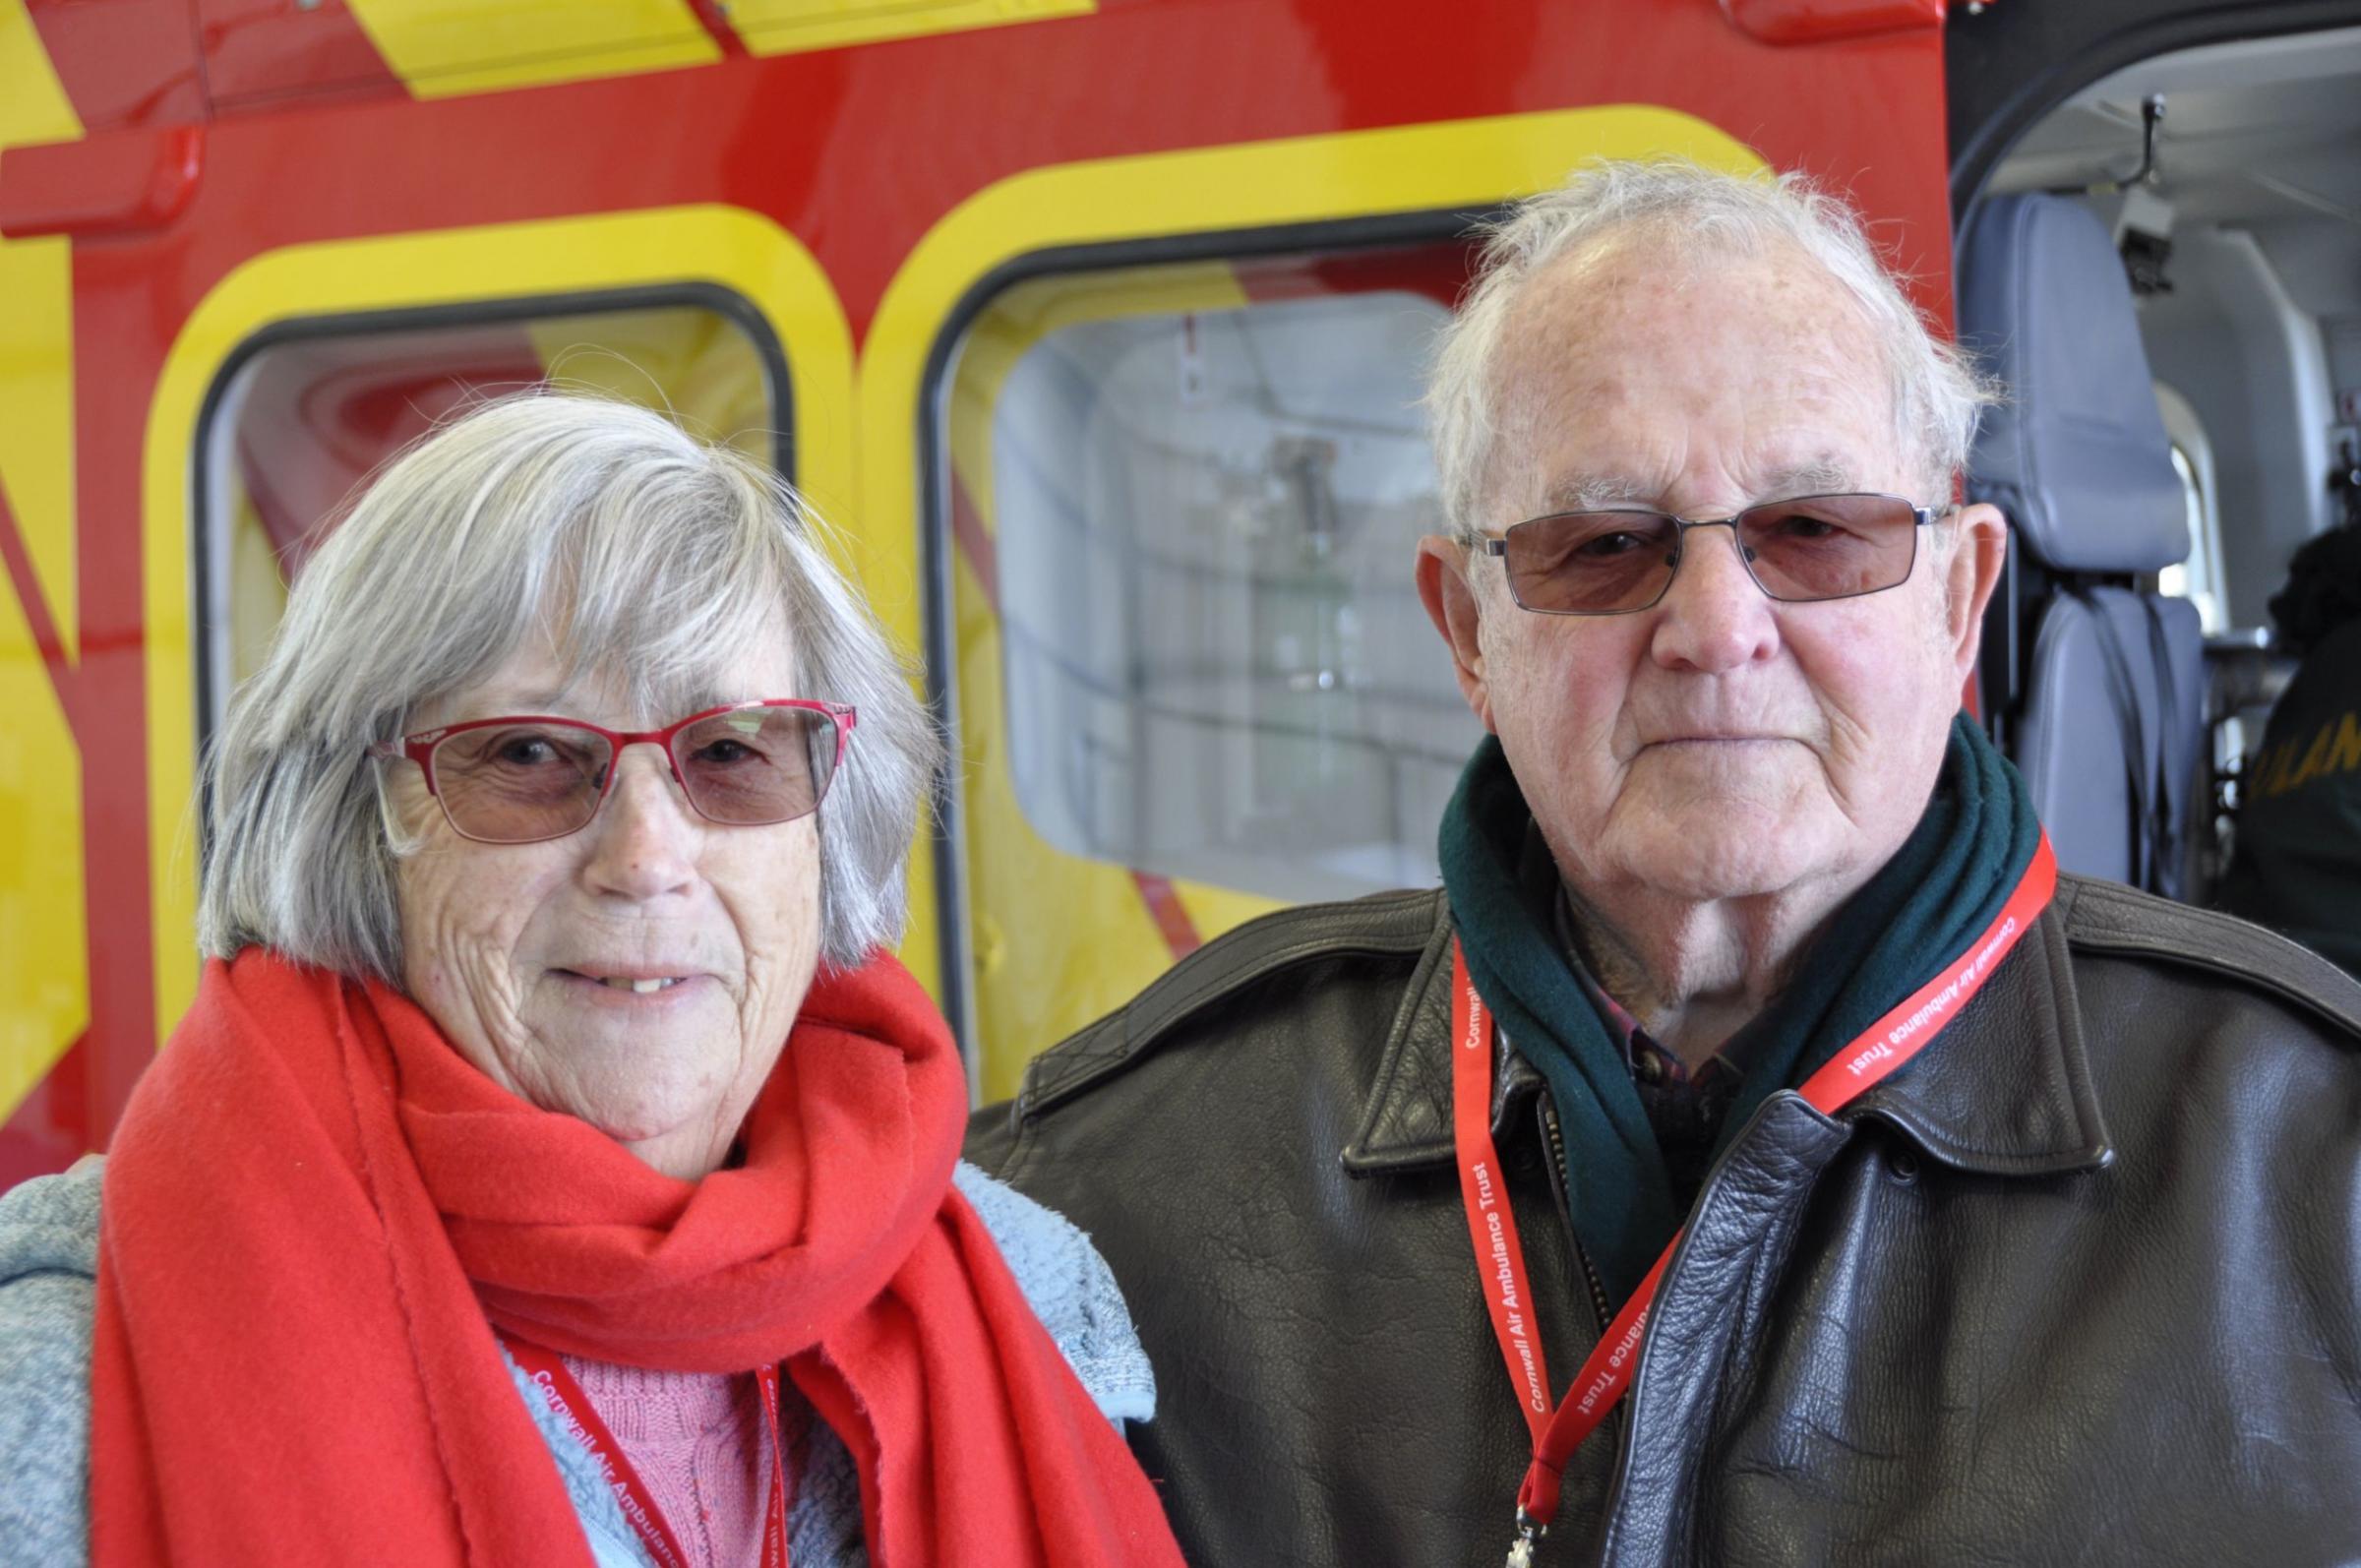 Derreck Lindsey, pictured with his wife, was one of the air ambulances first patients